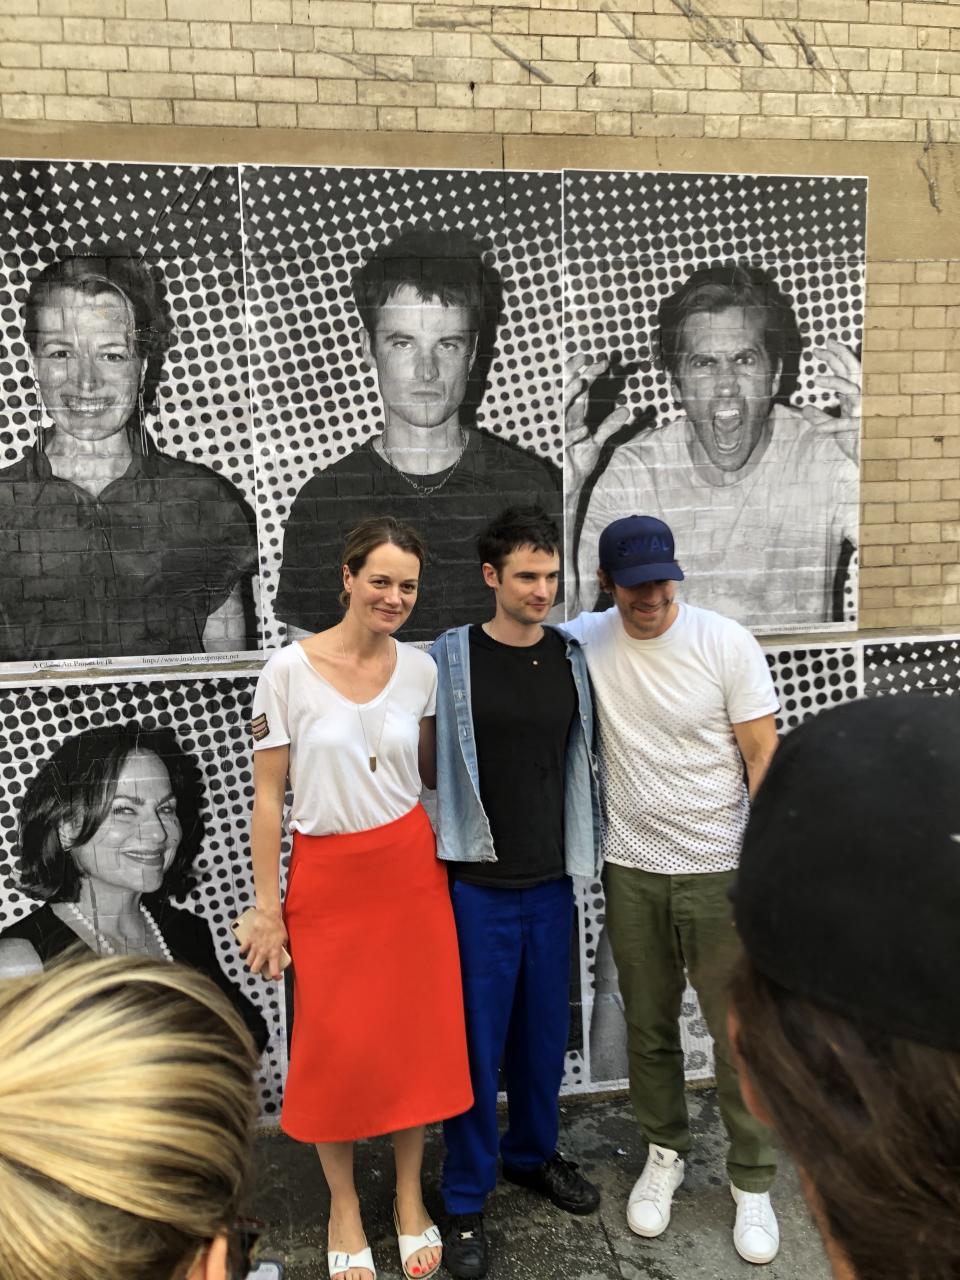 Sea Wall / A Life director Carrie Cracknell and stars Sturridge and Gyllenhaal posing in front of the mural.